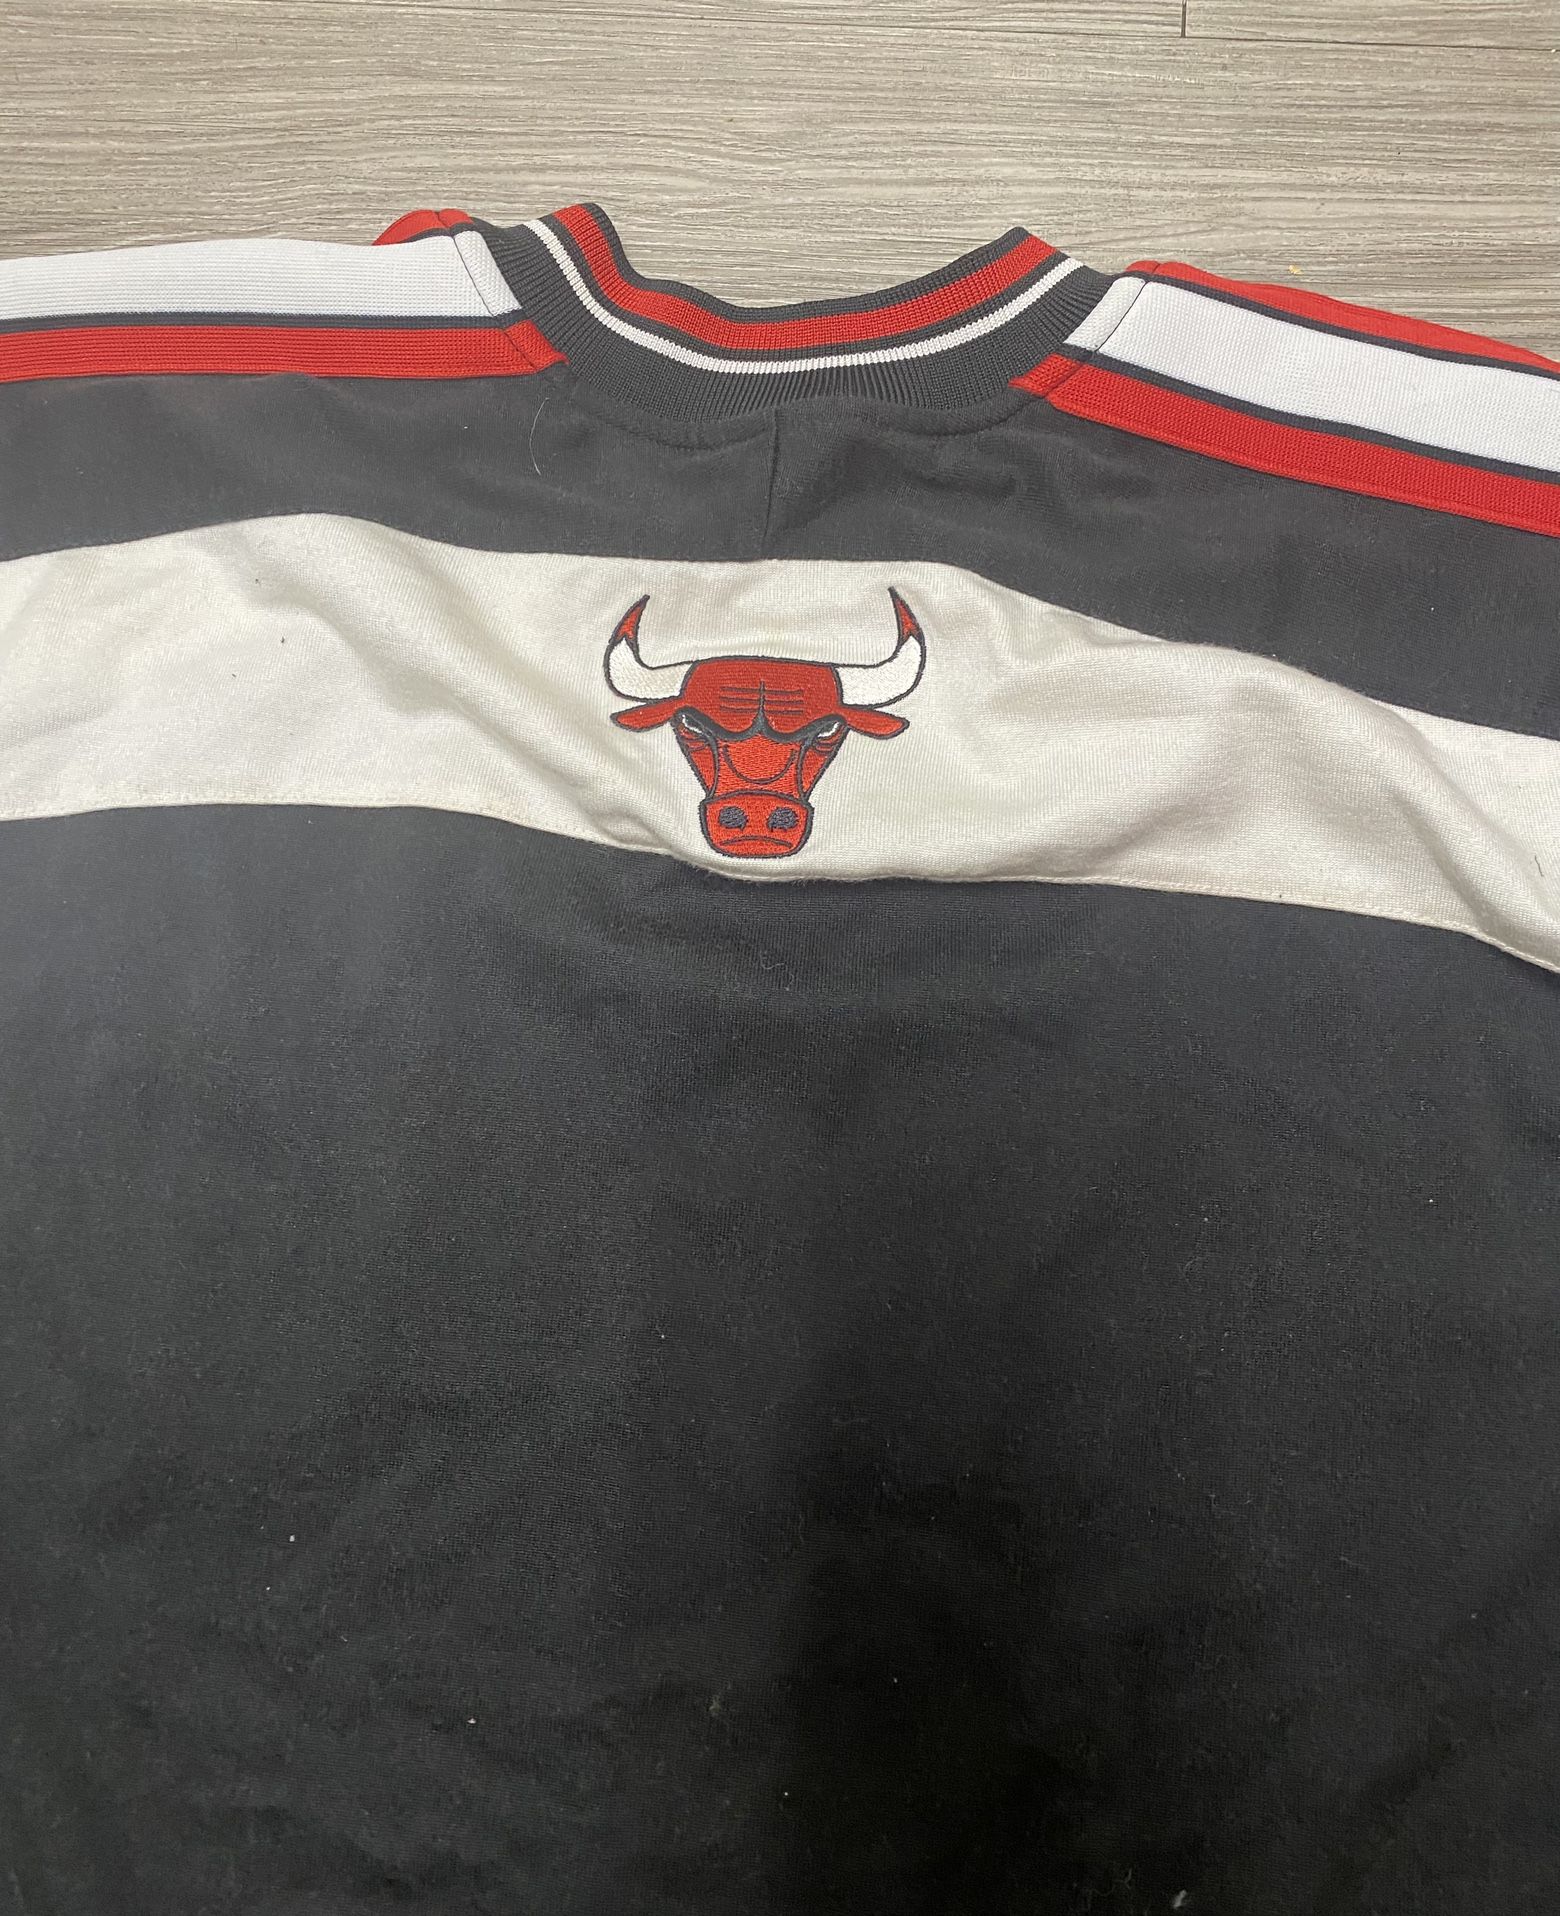 Chicago Bulls 1998 NBA Champions “Reigning of the Bulls!” Vintage T-Shirt  Sz Large for Sale in Chicago, IL - OfferUp